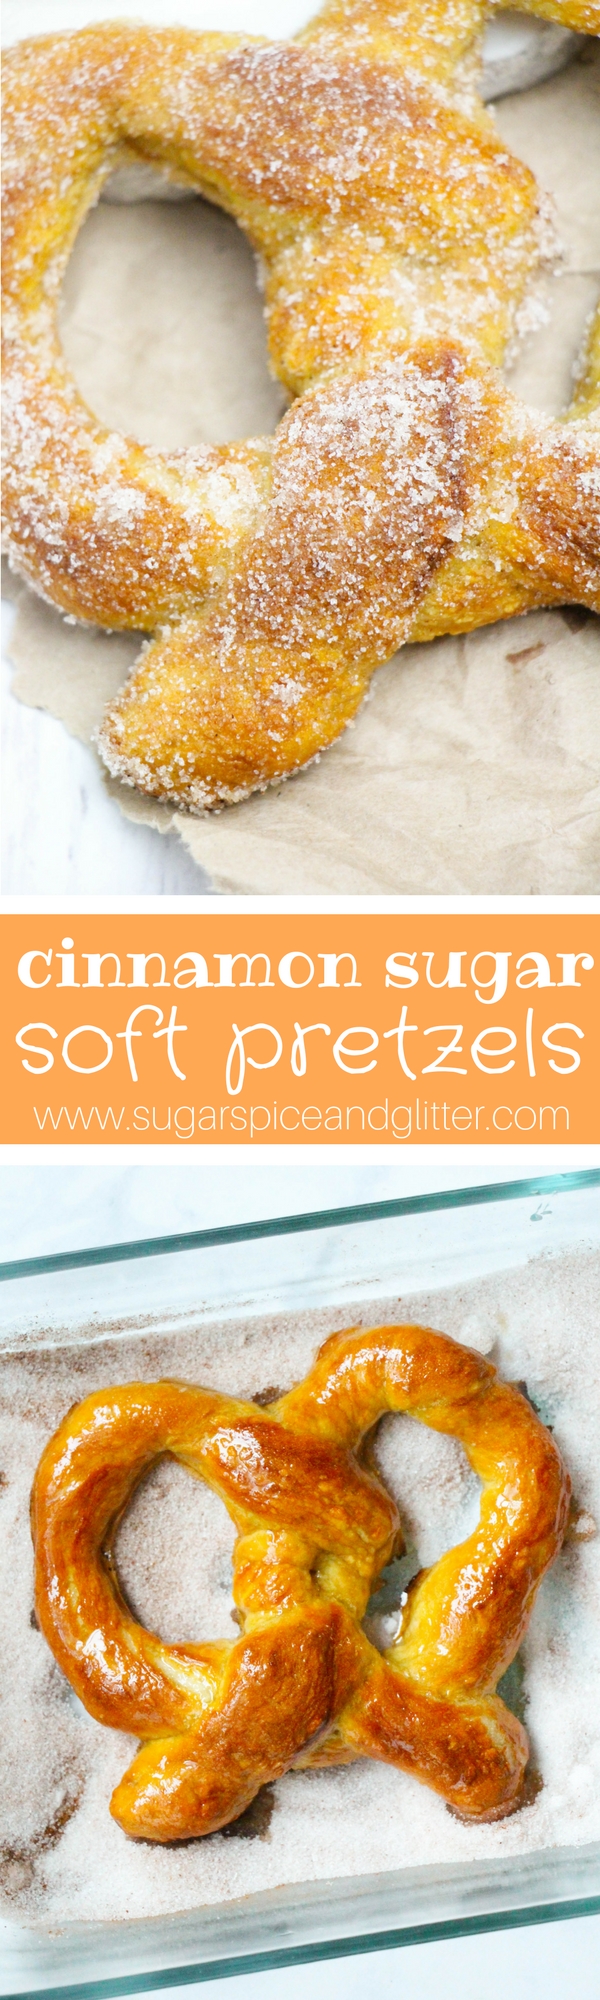 Cinnamon Sugar Pretzels – Better Than You Can Get at the Mall!